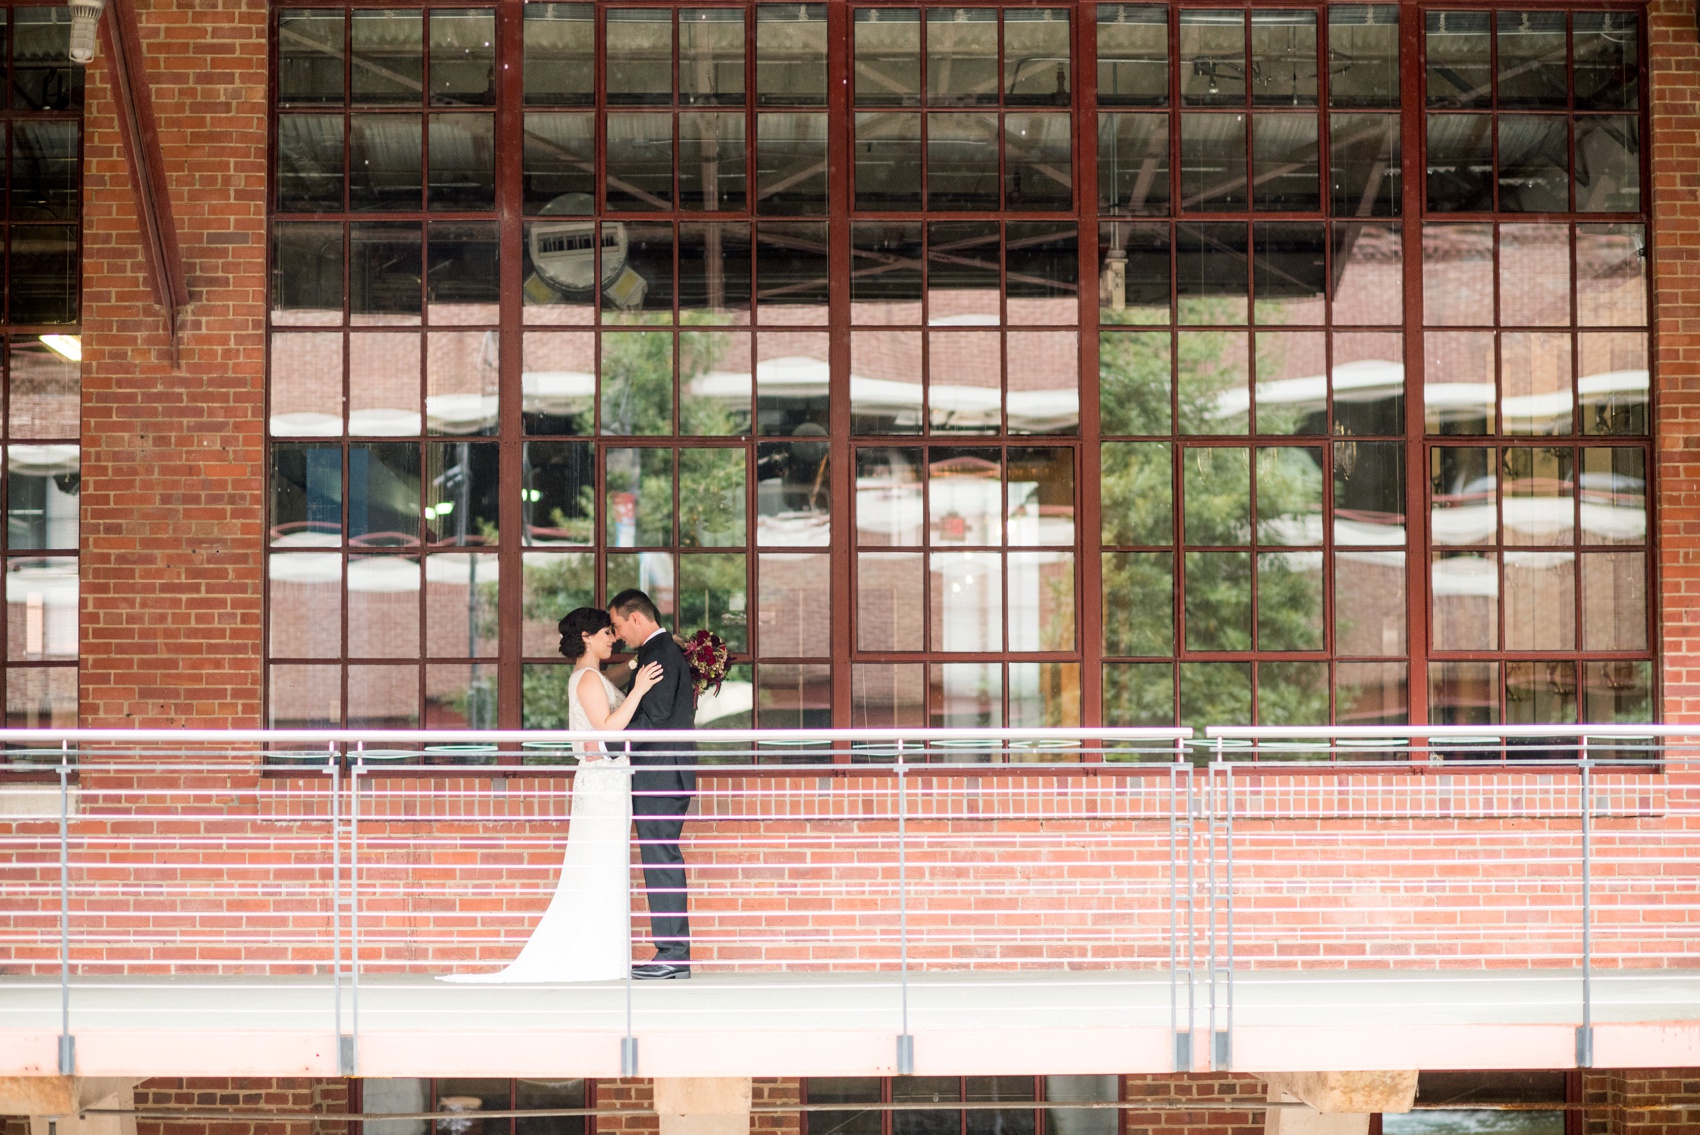 Bay 7 wedding photos by Mikkel Paige Photography. Raleigh wedding photographer captures the bride and groom's industrial outdoor portraits in the rain with an umbrella.